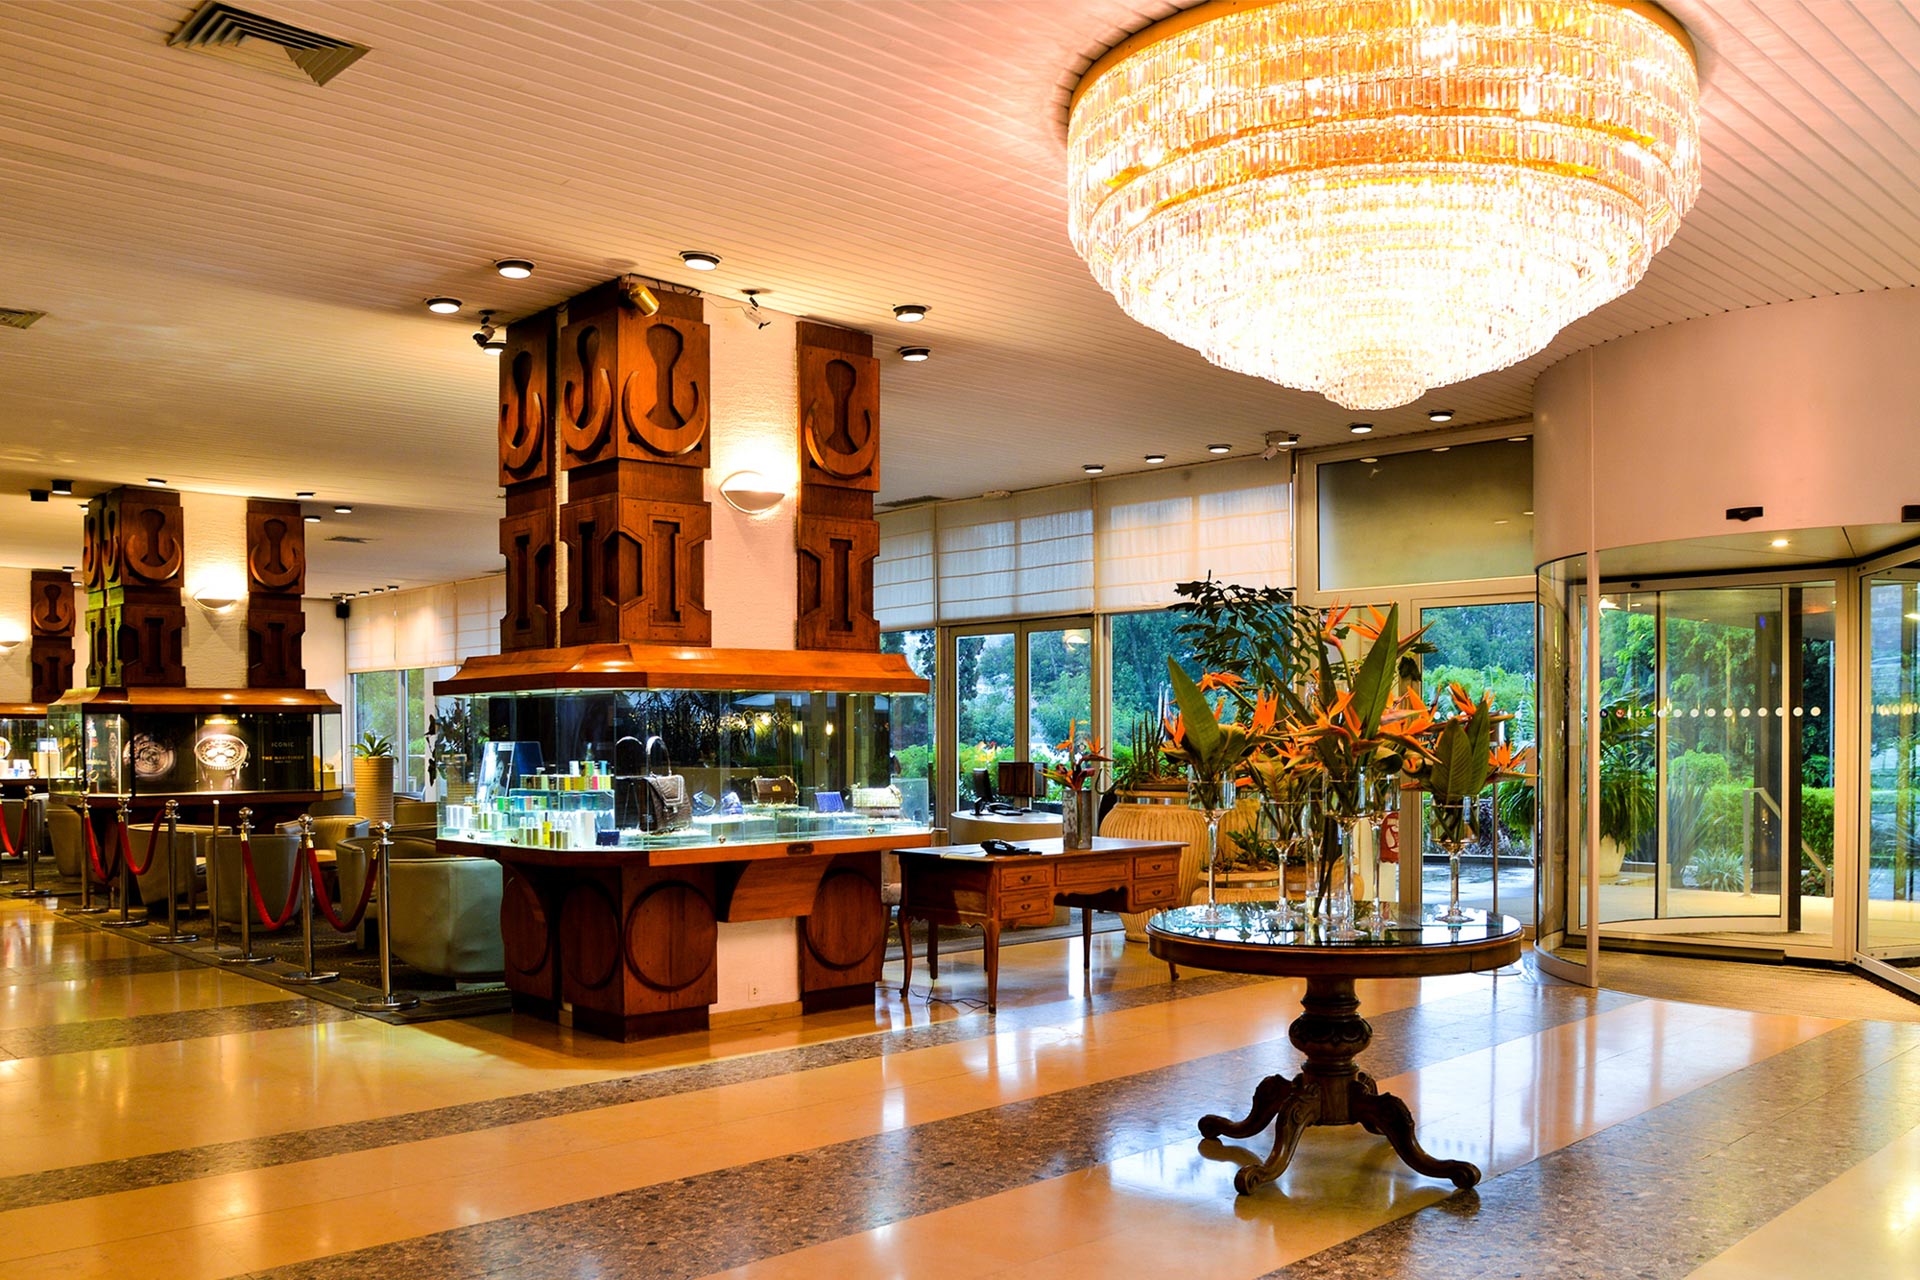 Lobby and Dining